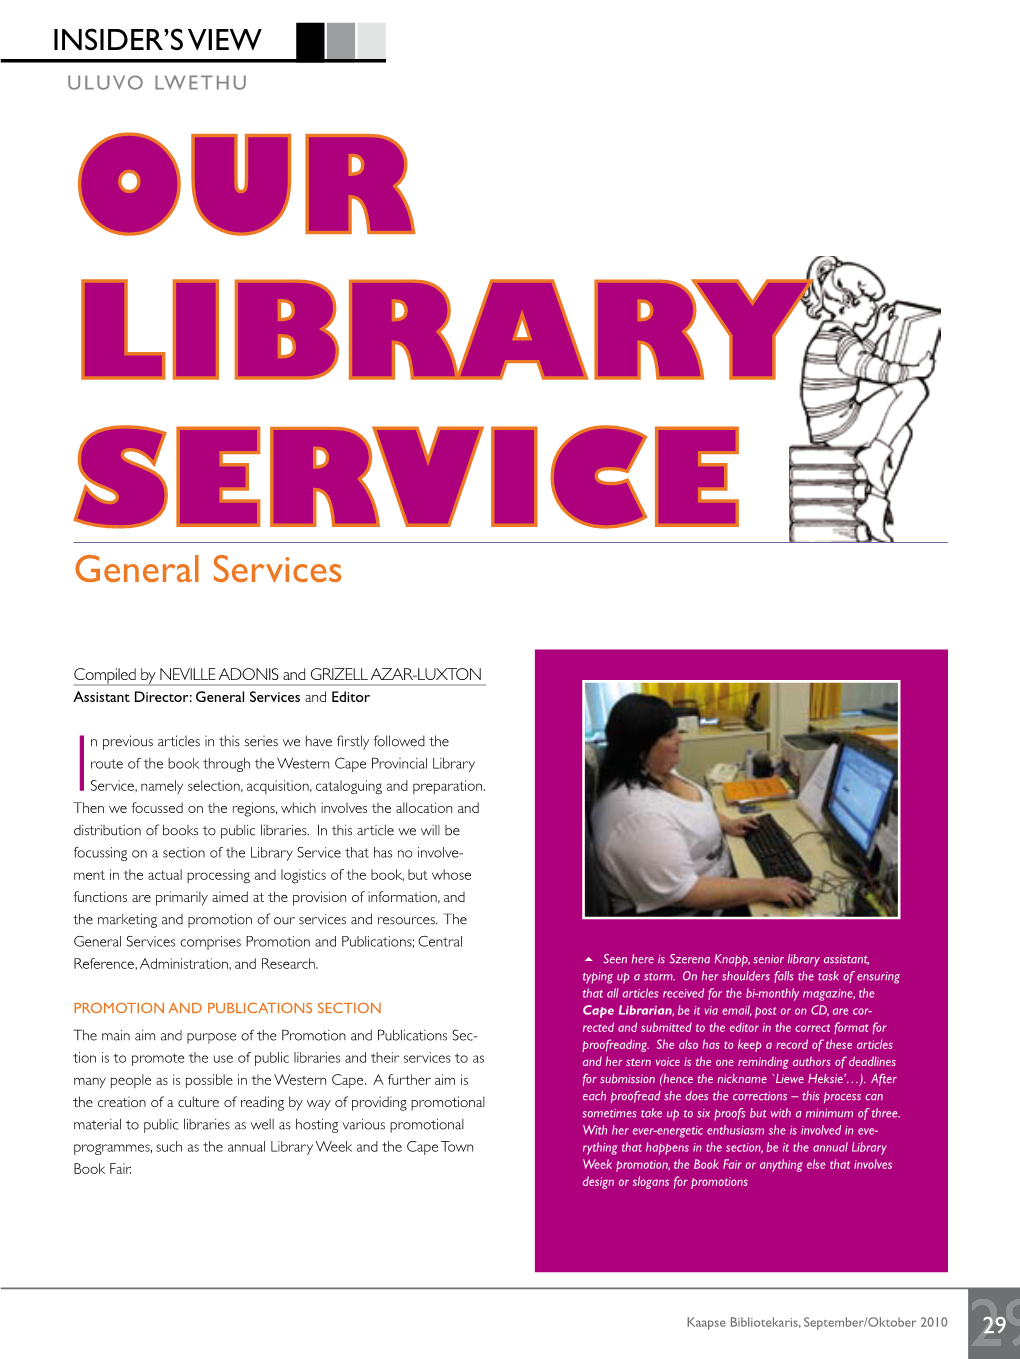 OUR LIBRARY SERVICE General Services